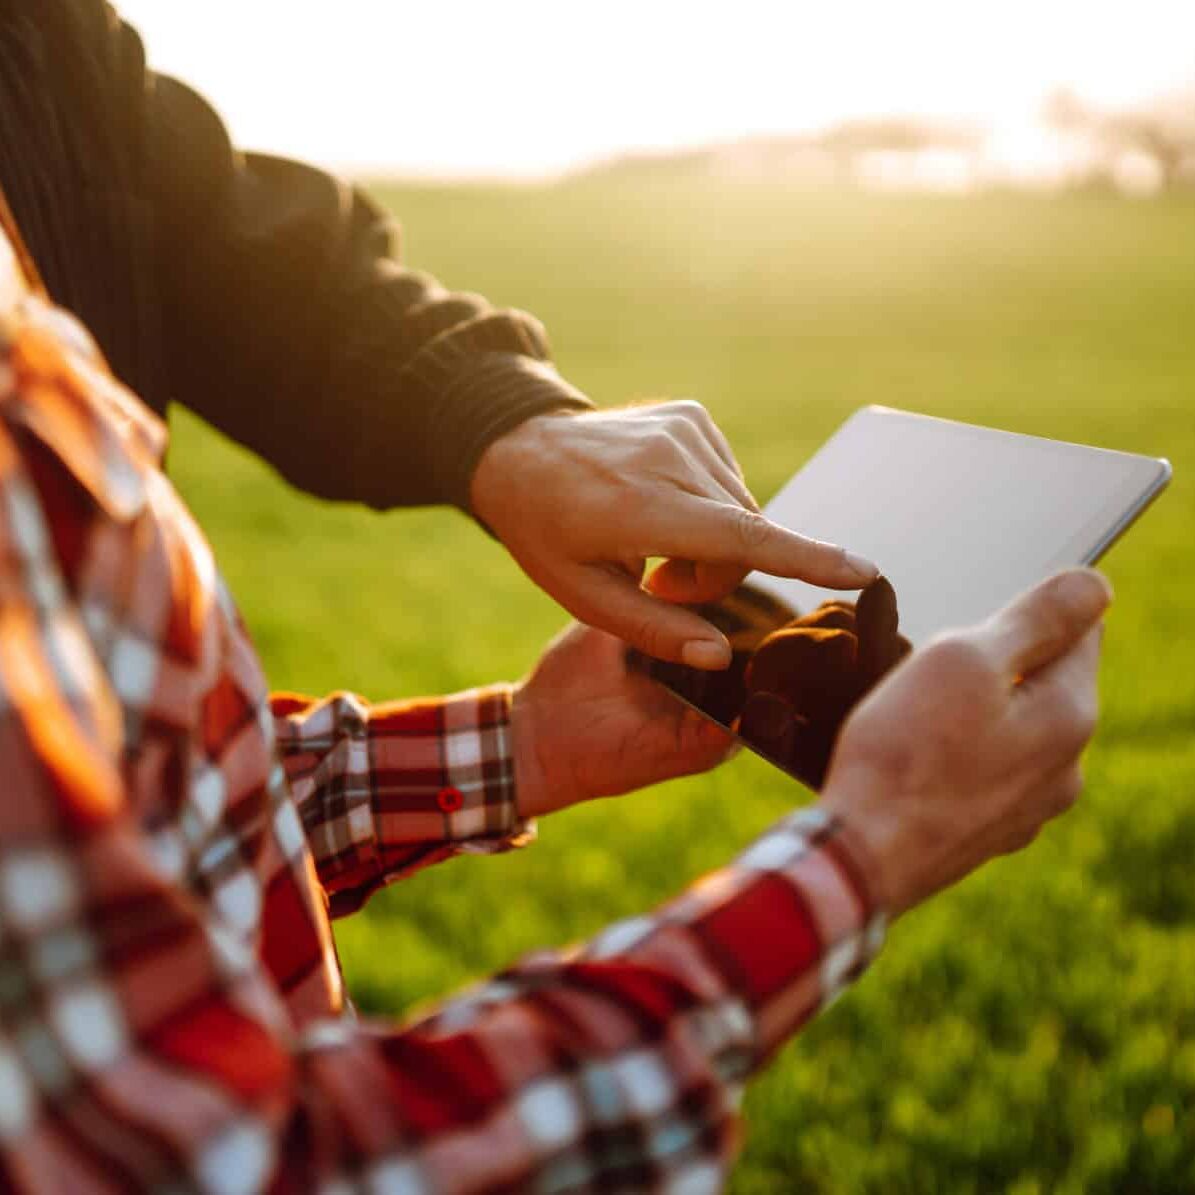 Farmers with tablet in the field